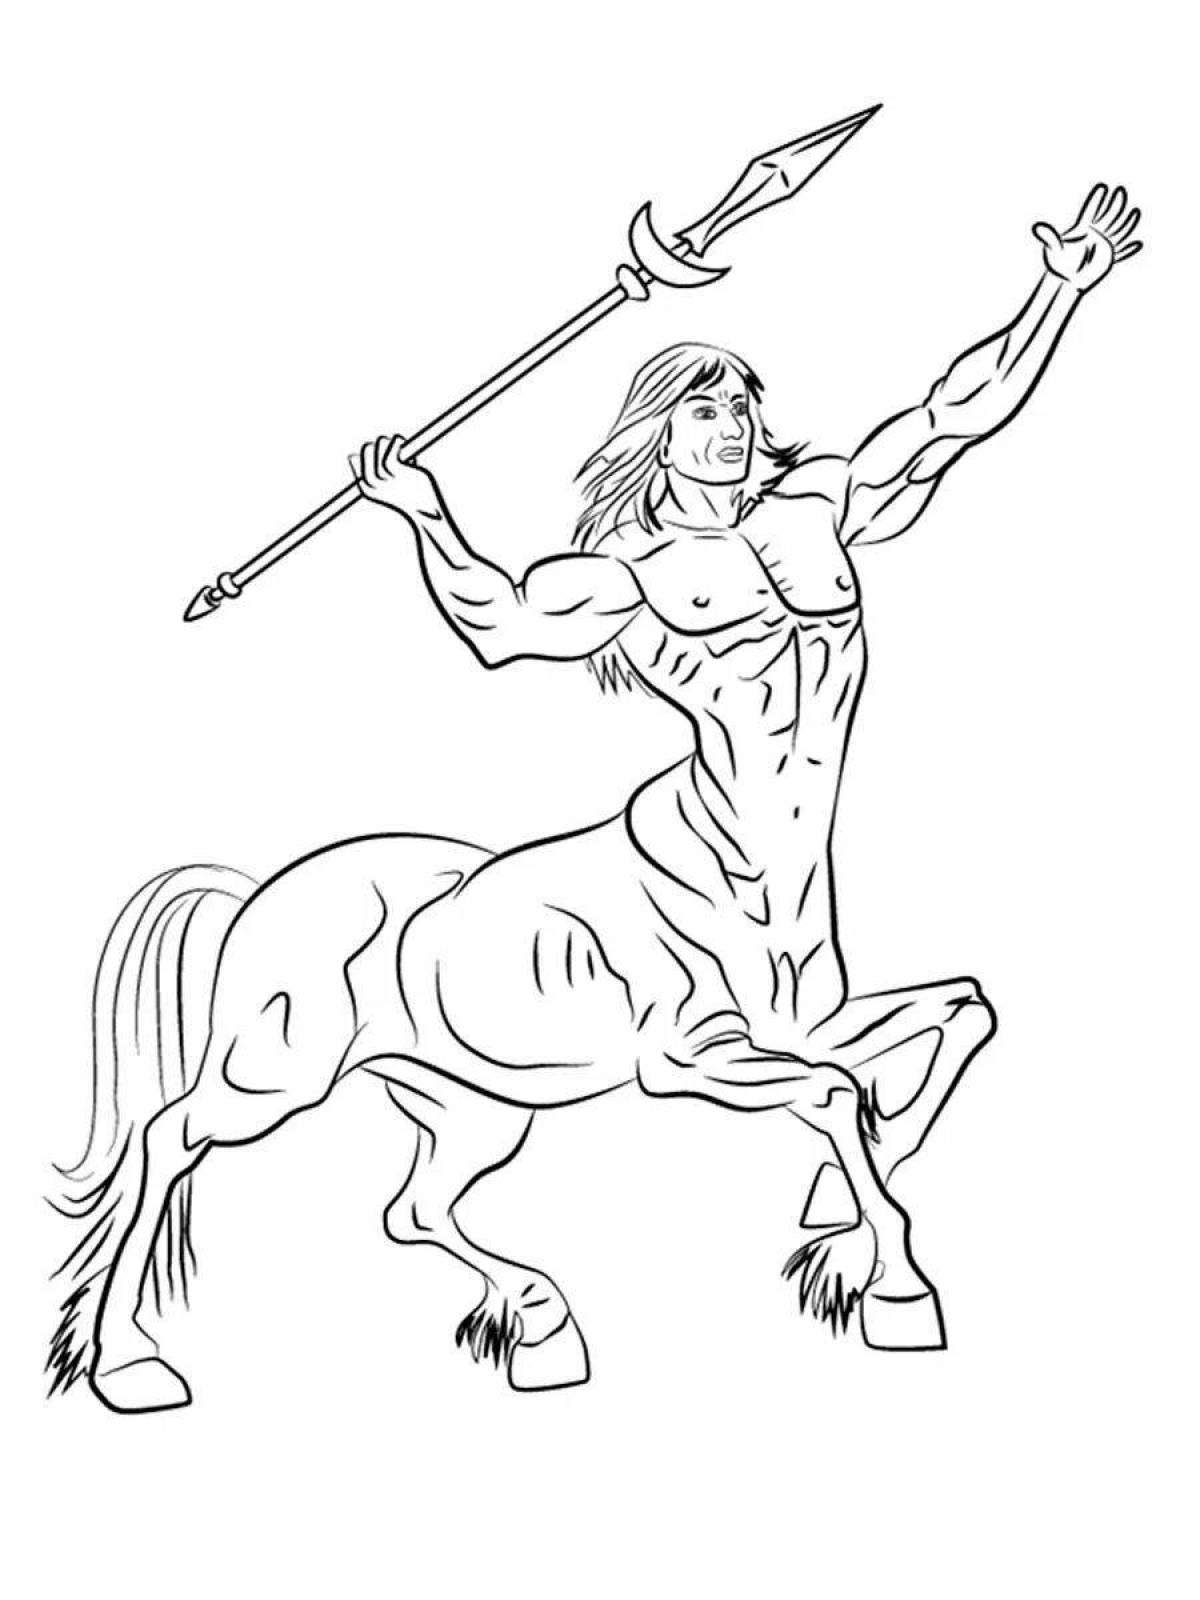 Incredible centaur coloring book for kids